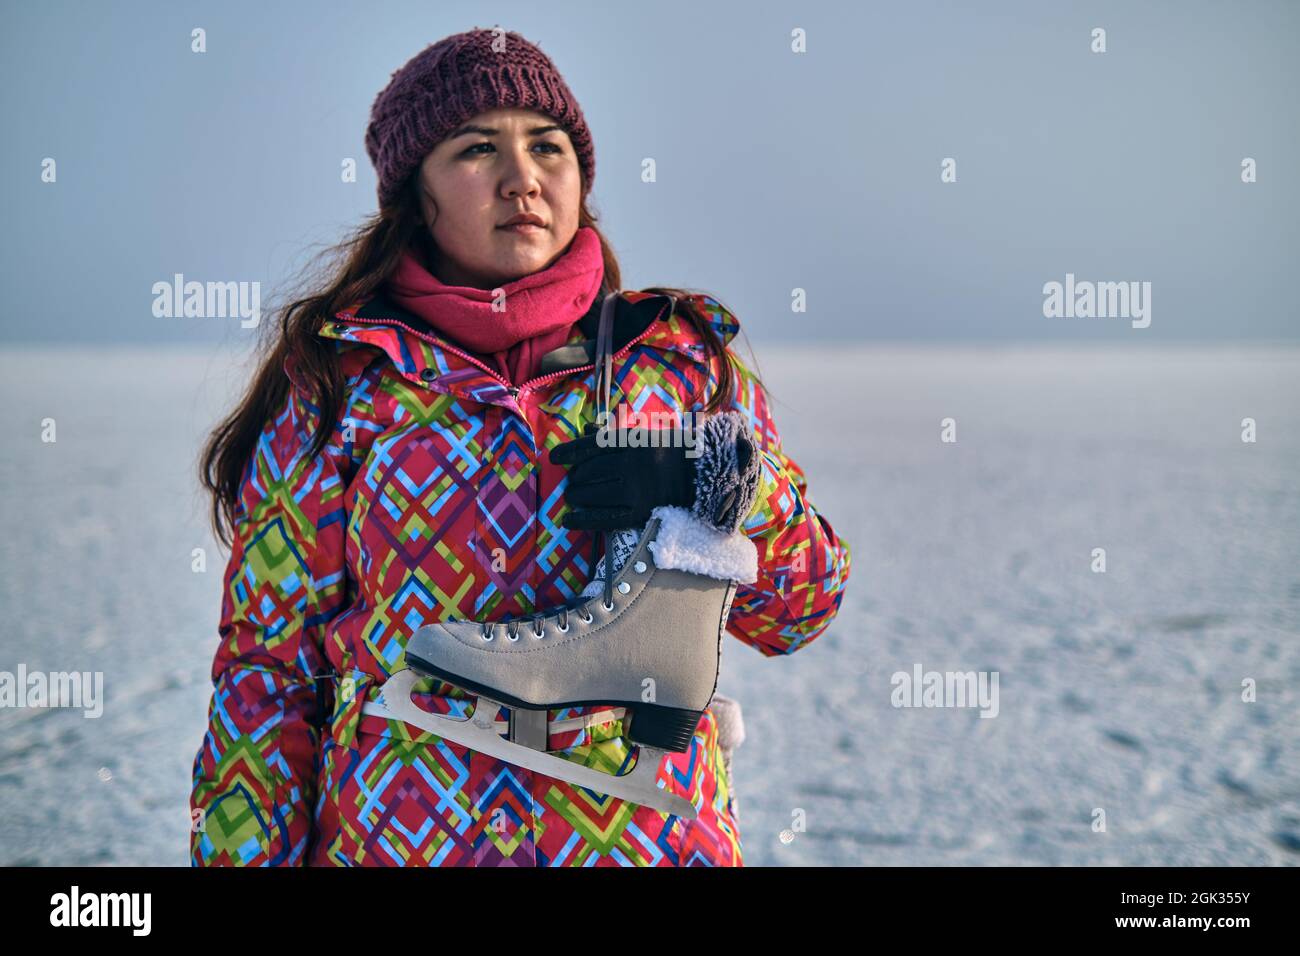 A woman in a ski suit holds skates on her shoulder and looks into the distance, after skiing on a frozen lake Stock Photo